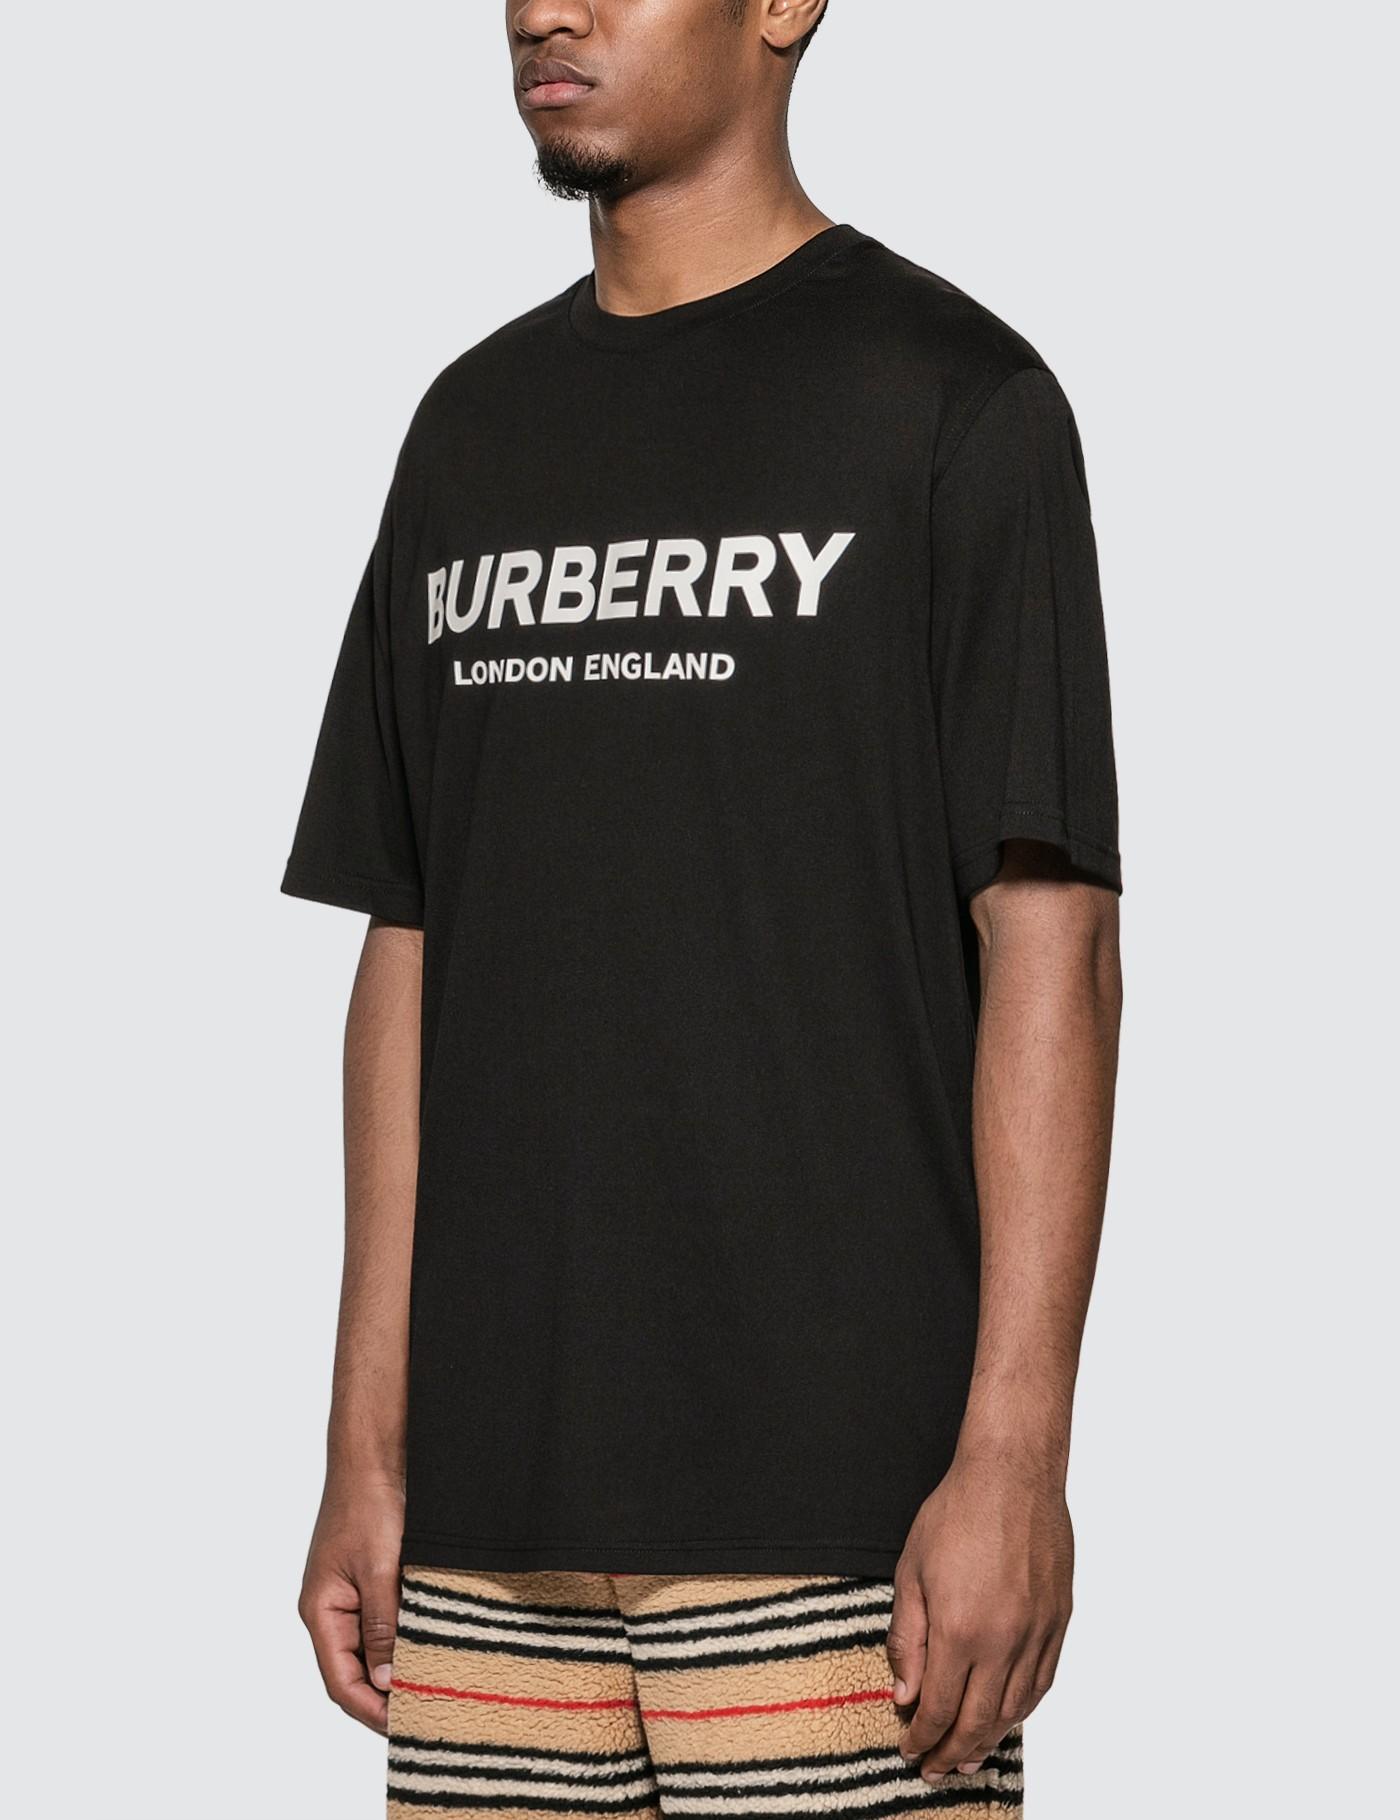 Burberry Logo Print Cotton T Shirt in Black for Men Save 65% - Lyst